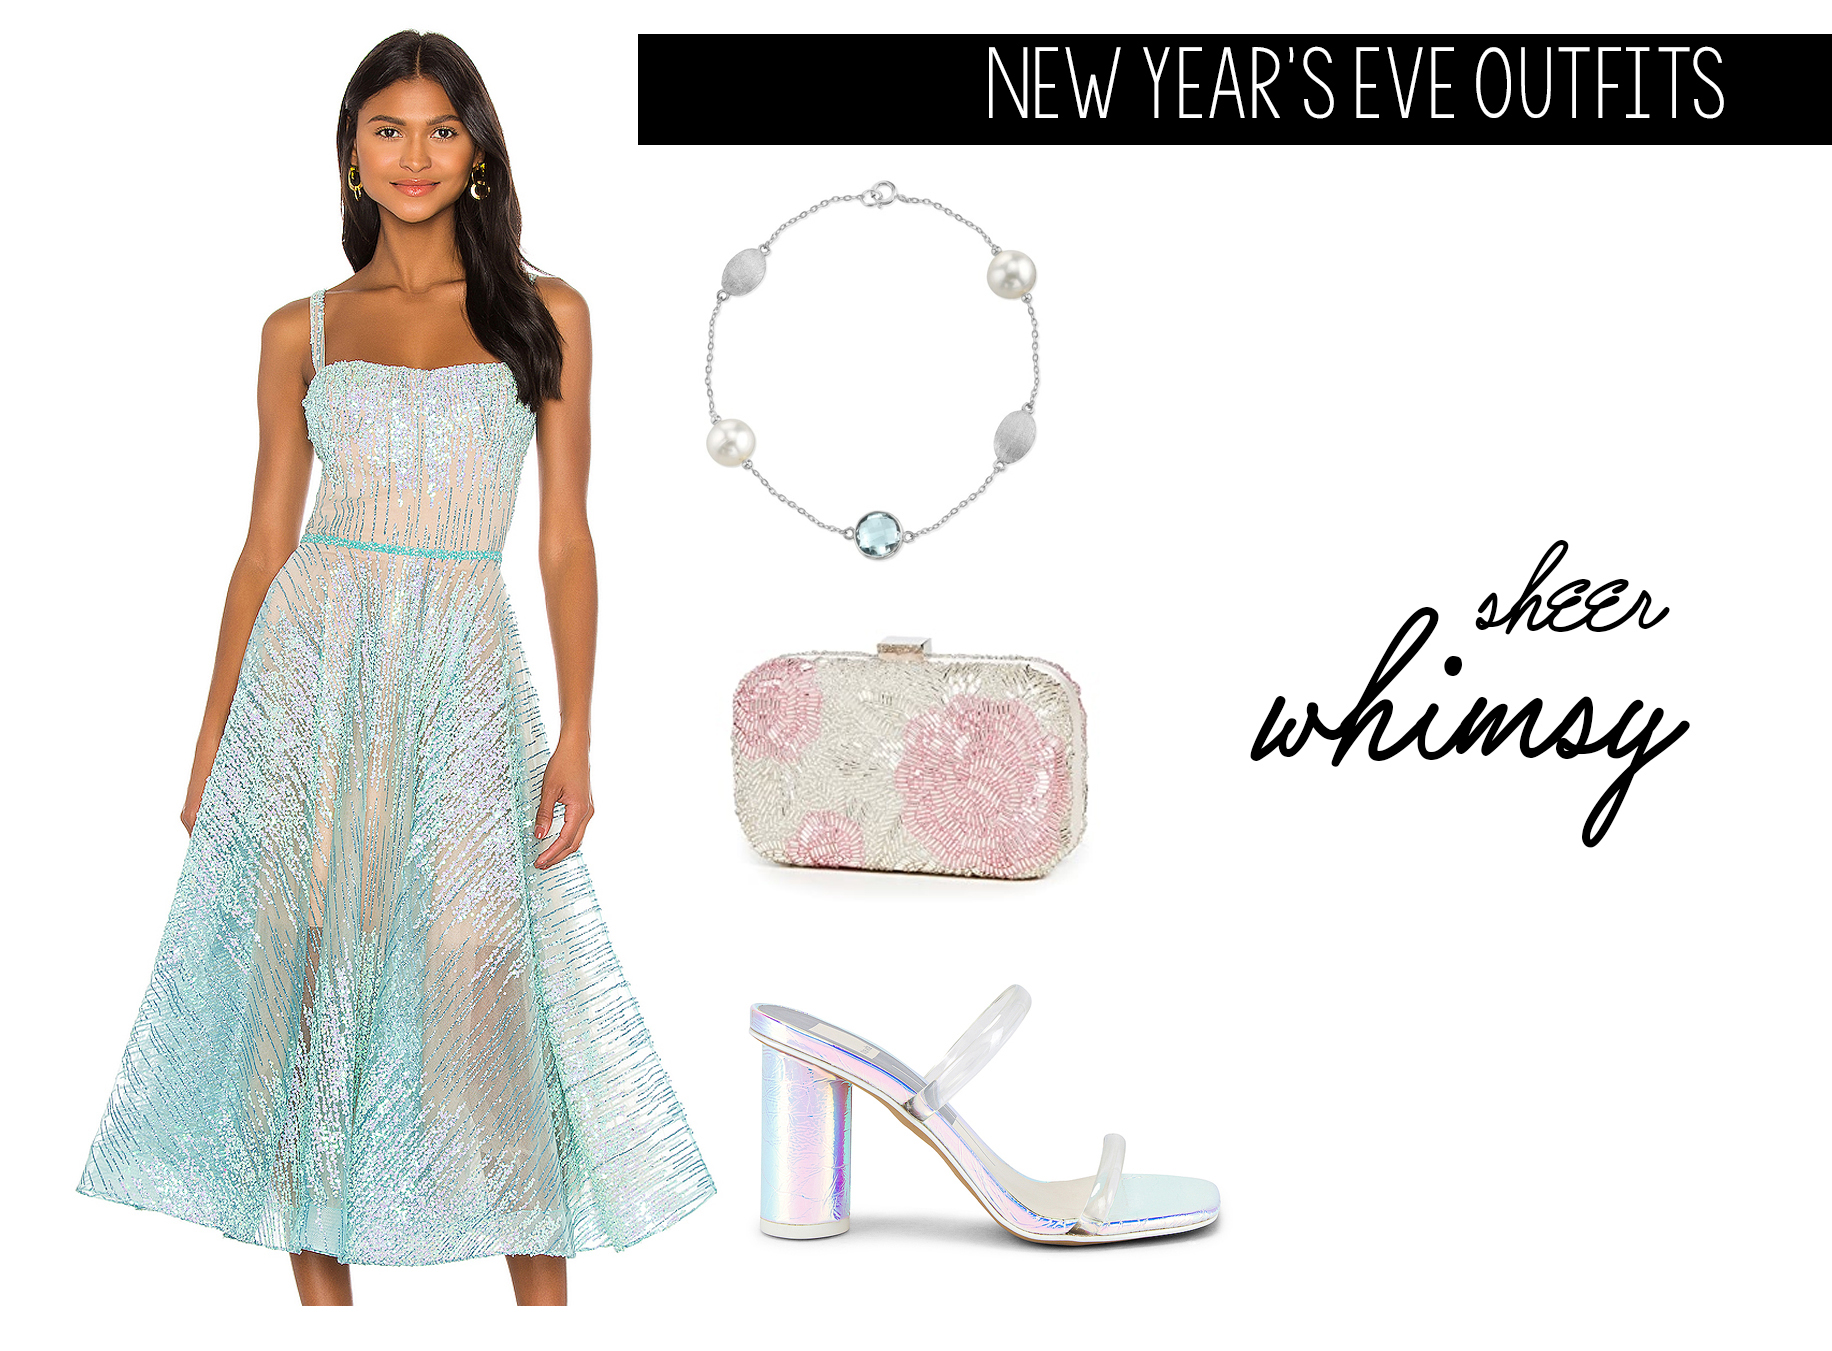 Feel the Magic in Sheer Whimsy Outfit